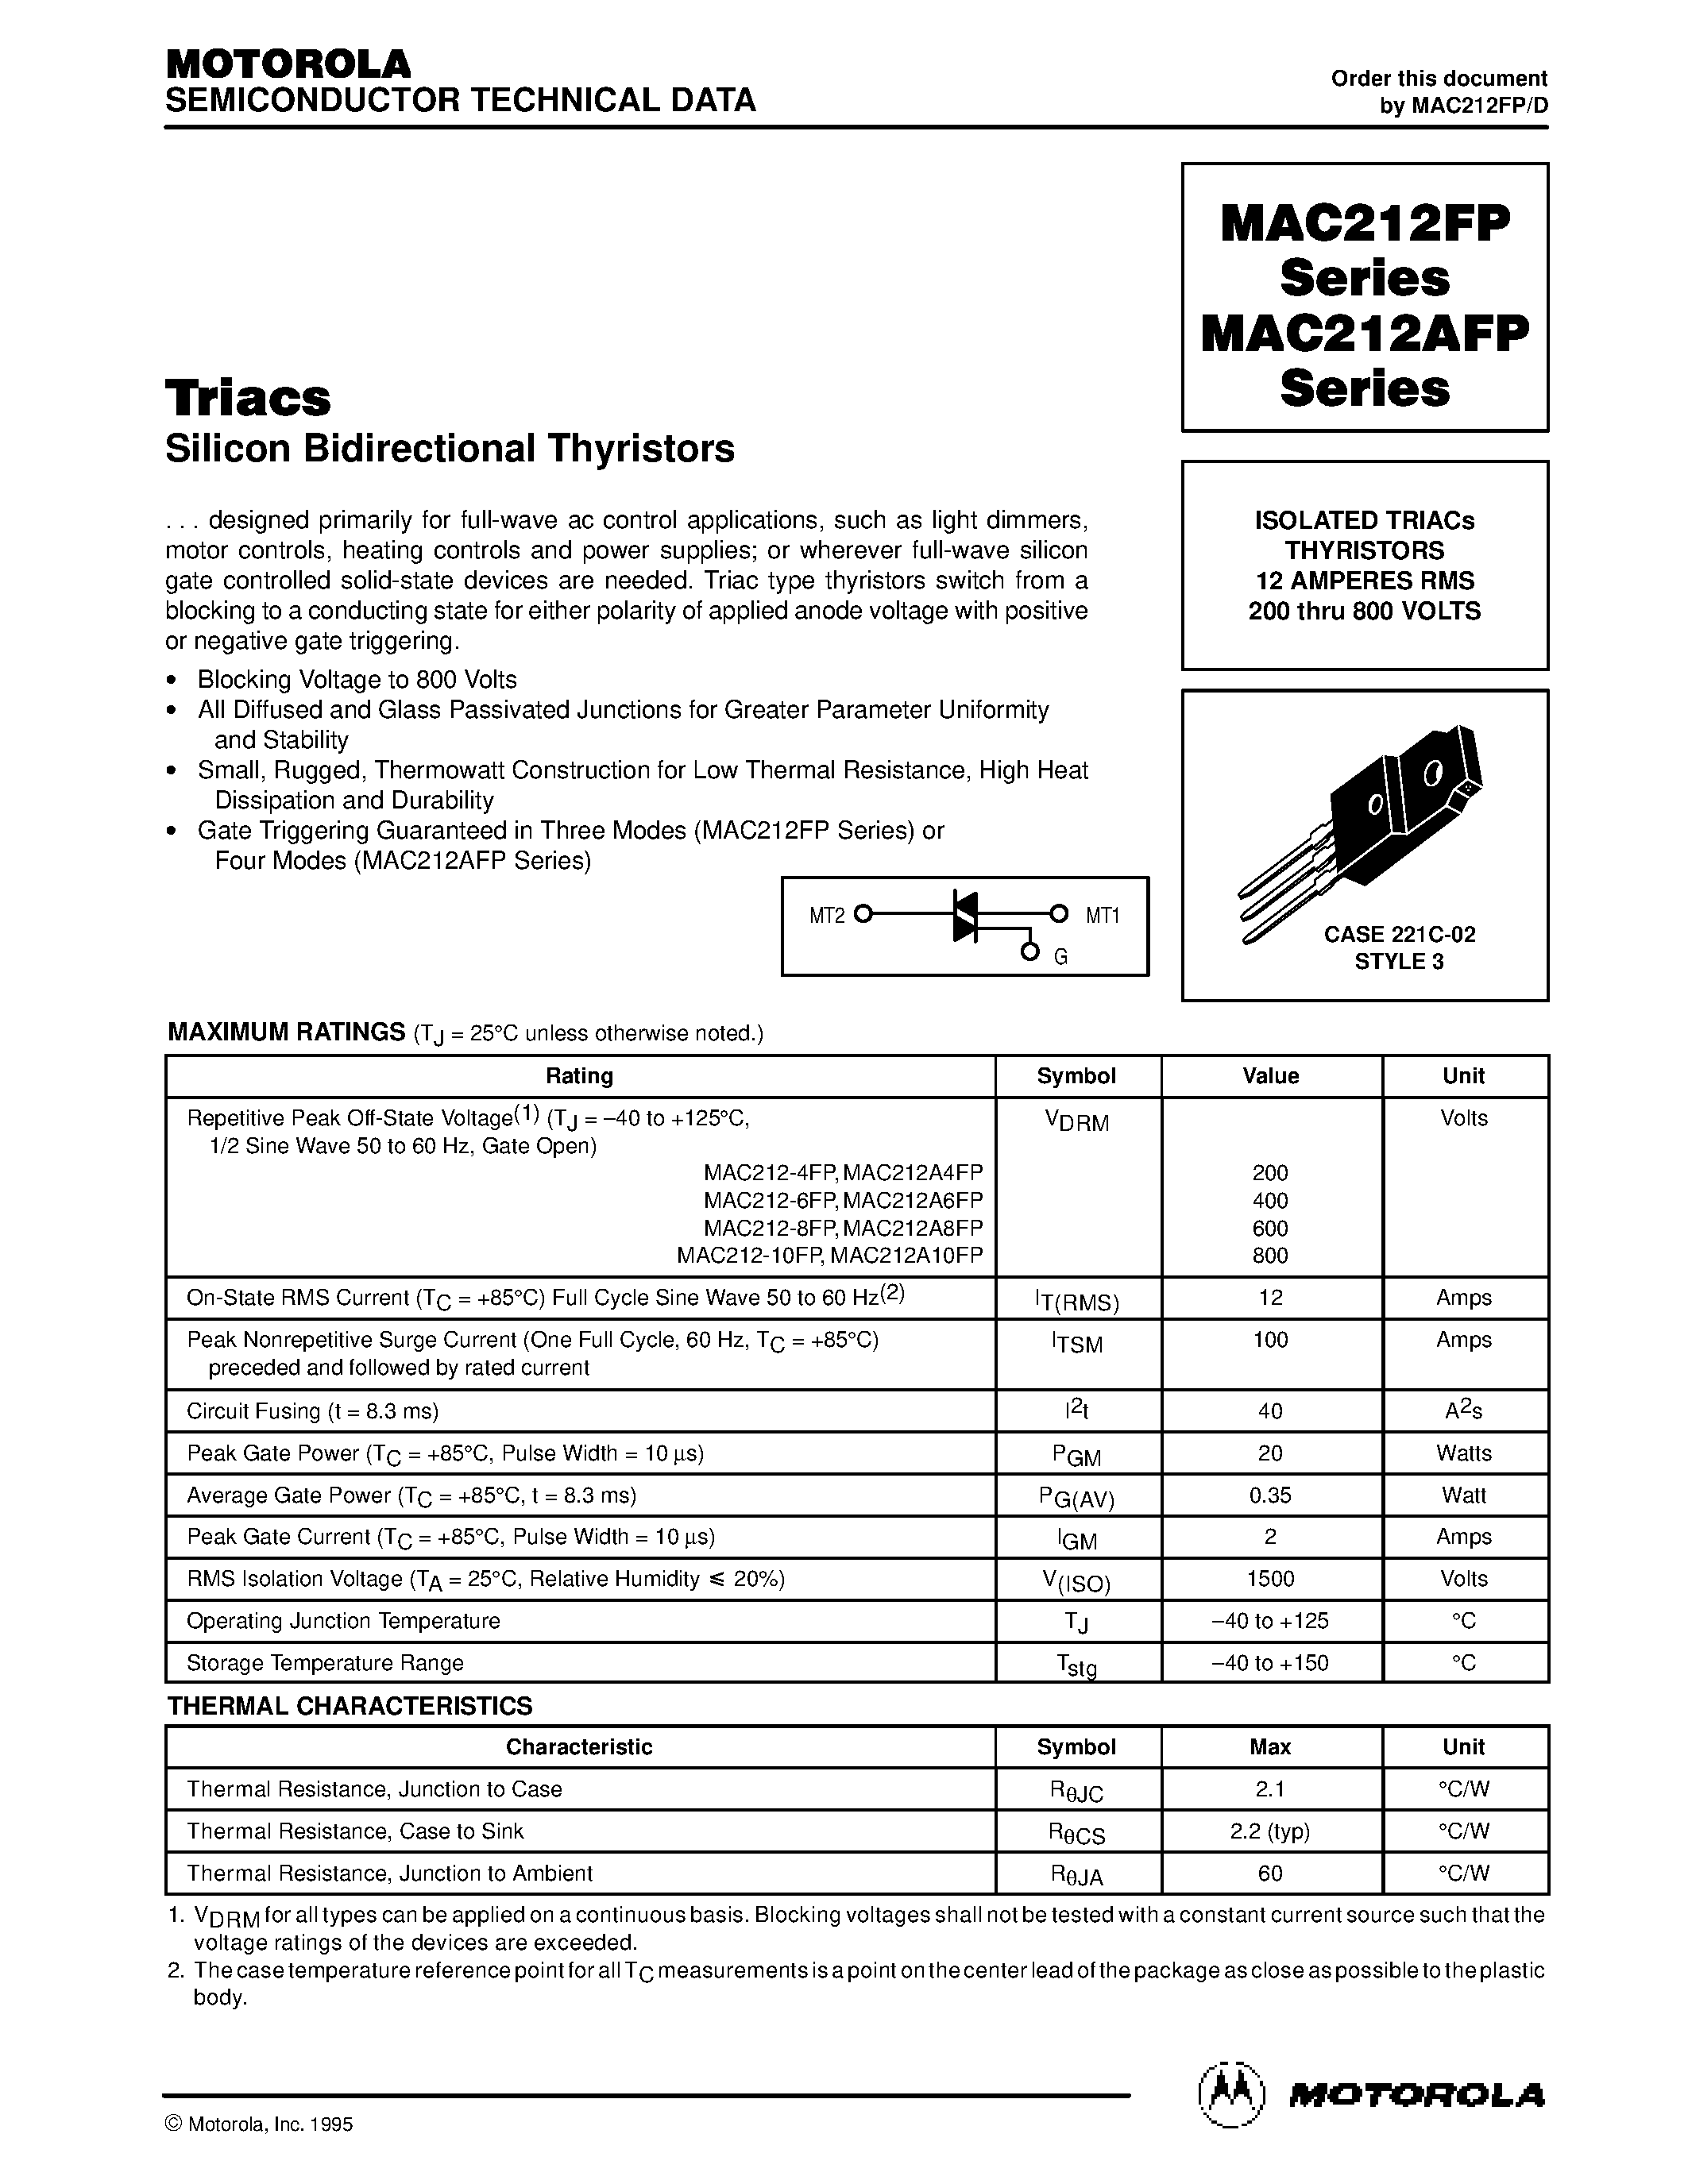 Datasheet MAC212-4FP - ISOLATED TRIACs THYRISTORS 12 AMPERES RMS 200 thru 800 VOLTS page 1